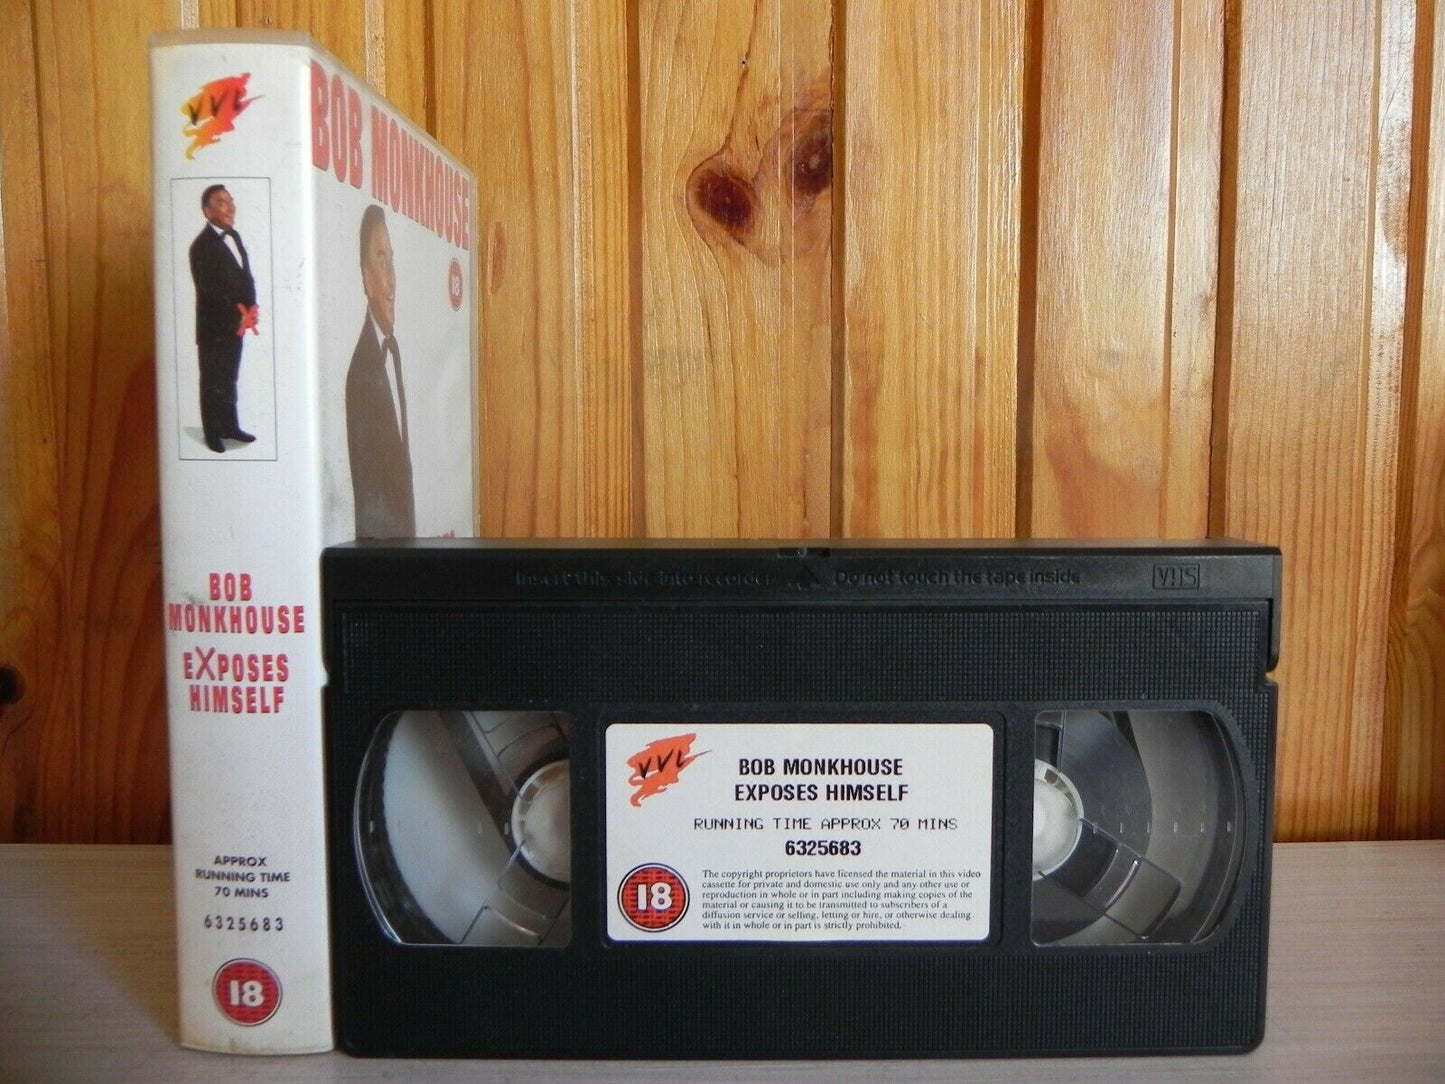 Bob Monkhouse - Exposes Himself - The Master Of Stand-Up - Comedy - Pal VHS-